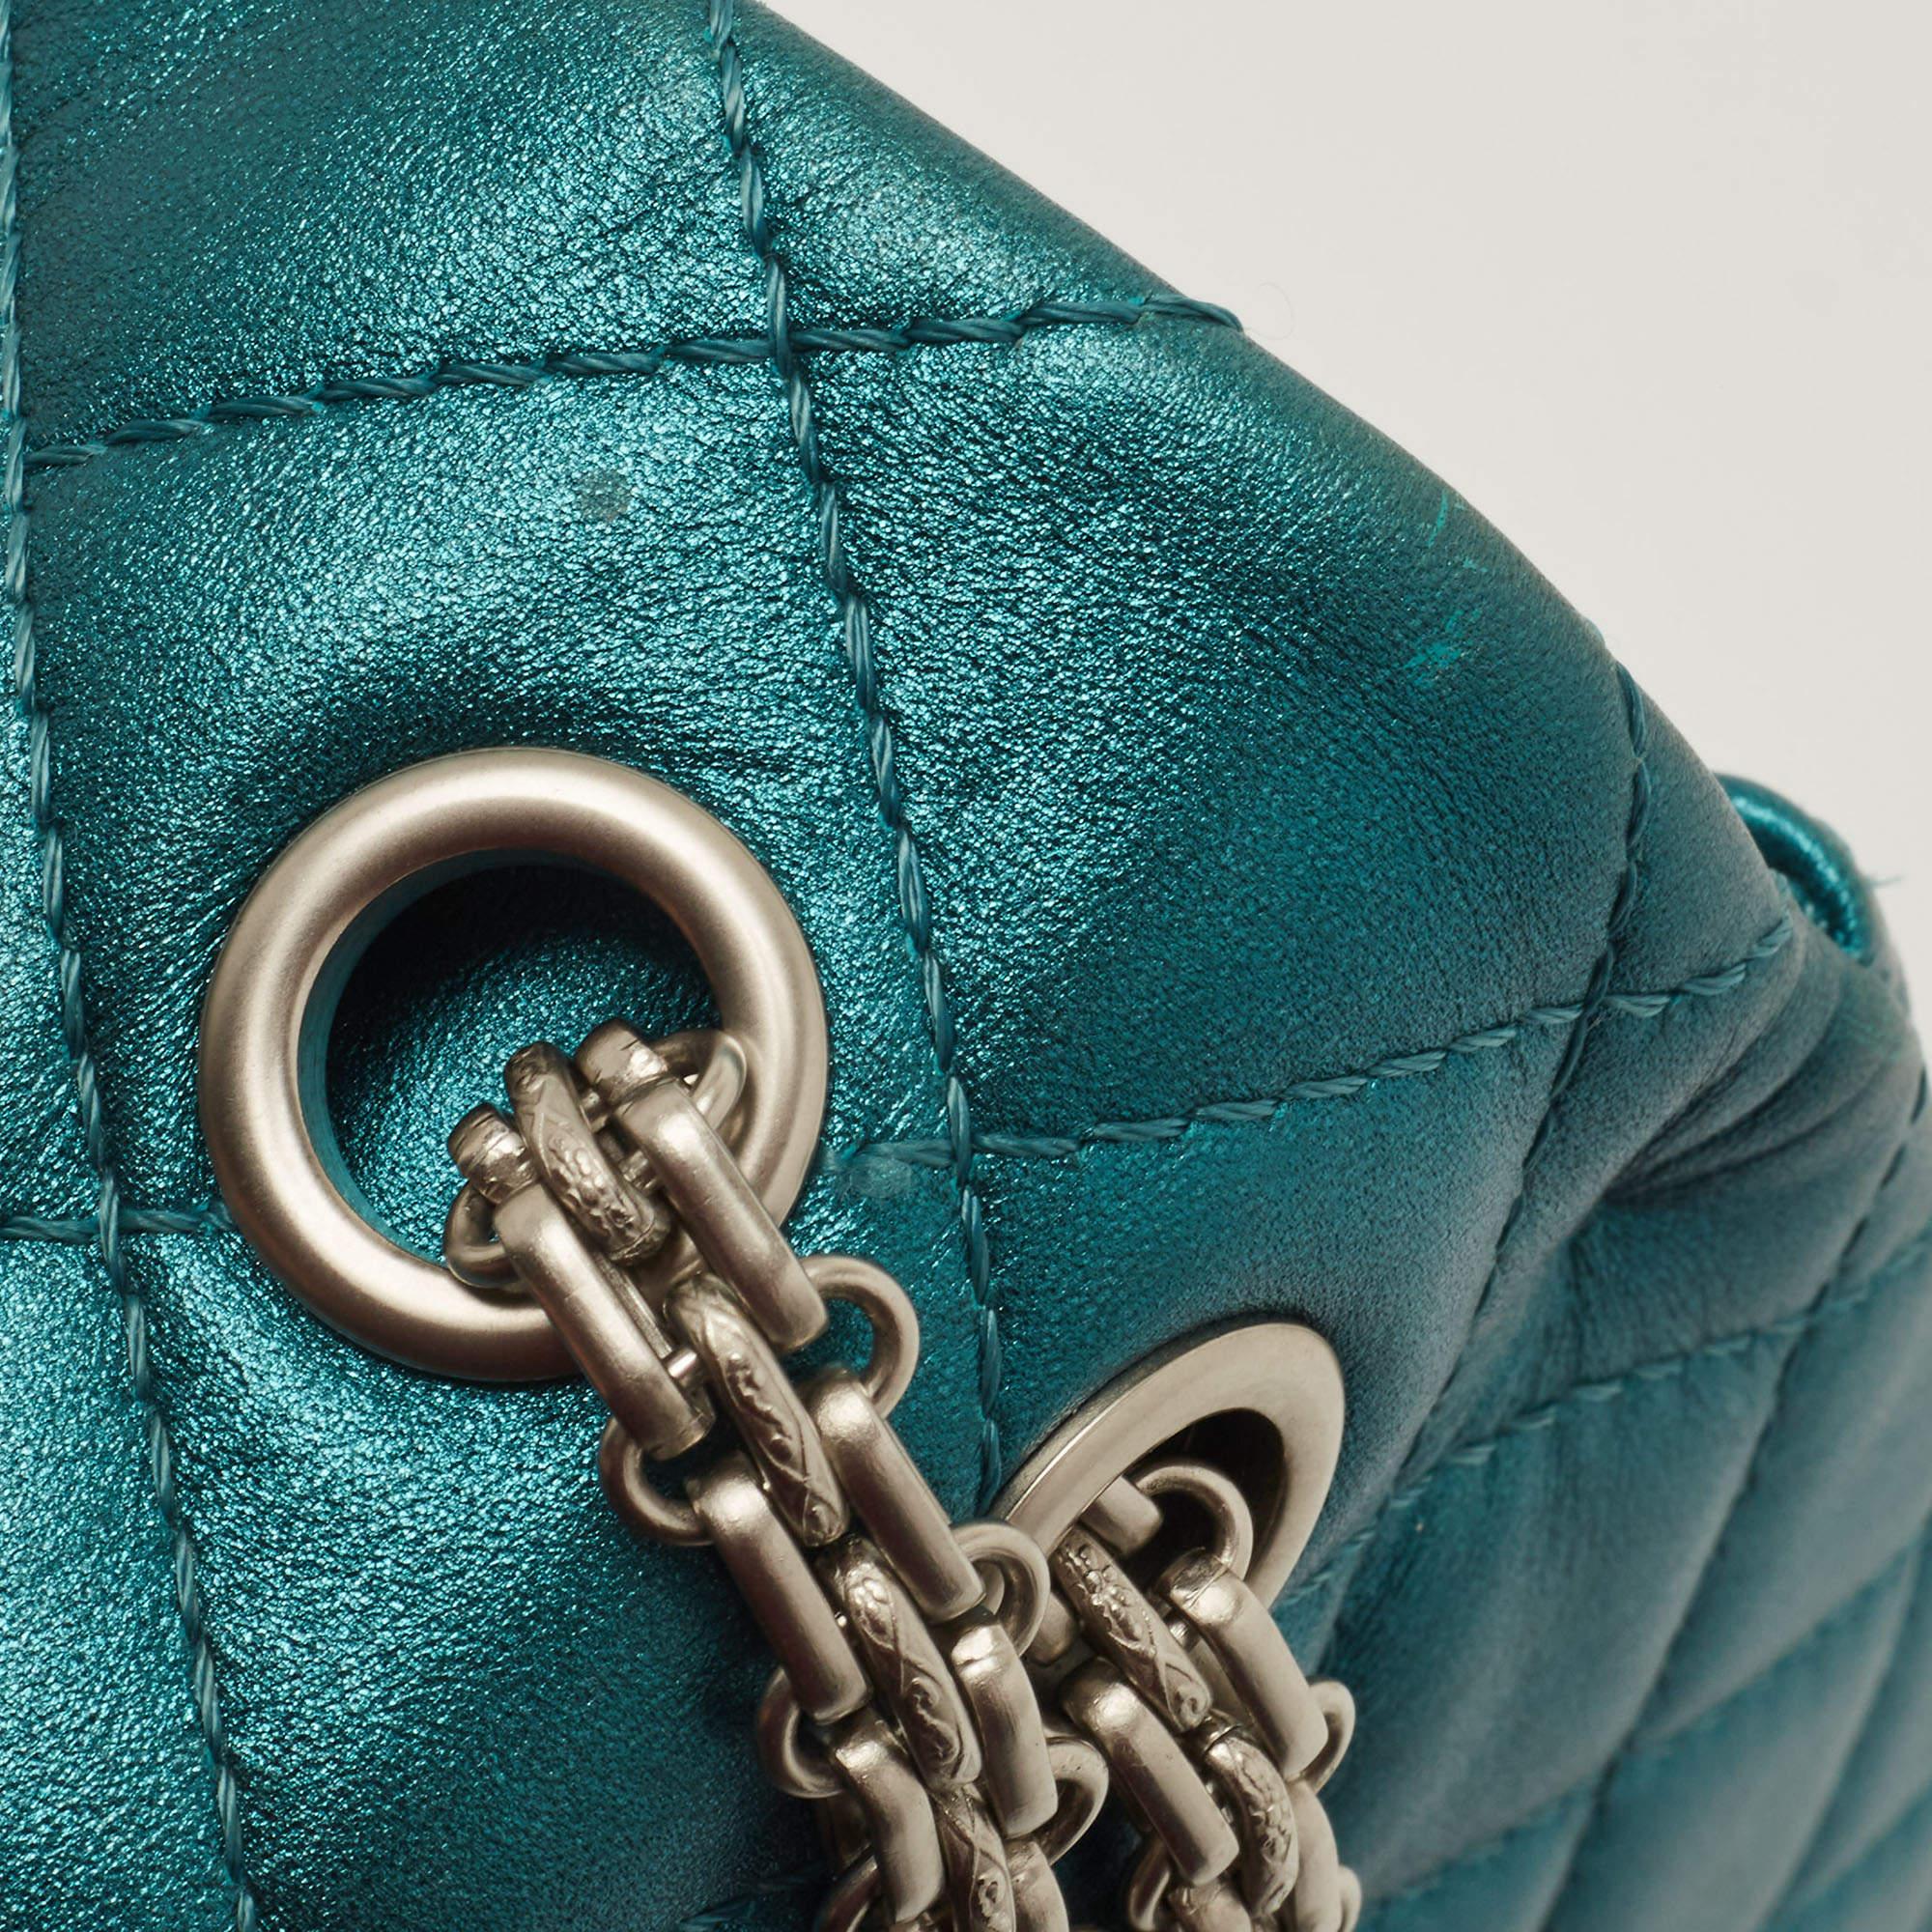 Chanel Metallic Teal Green Quilted Leather Reissue 2.55 Classic 226 Flap Bag For Sale 4